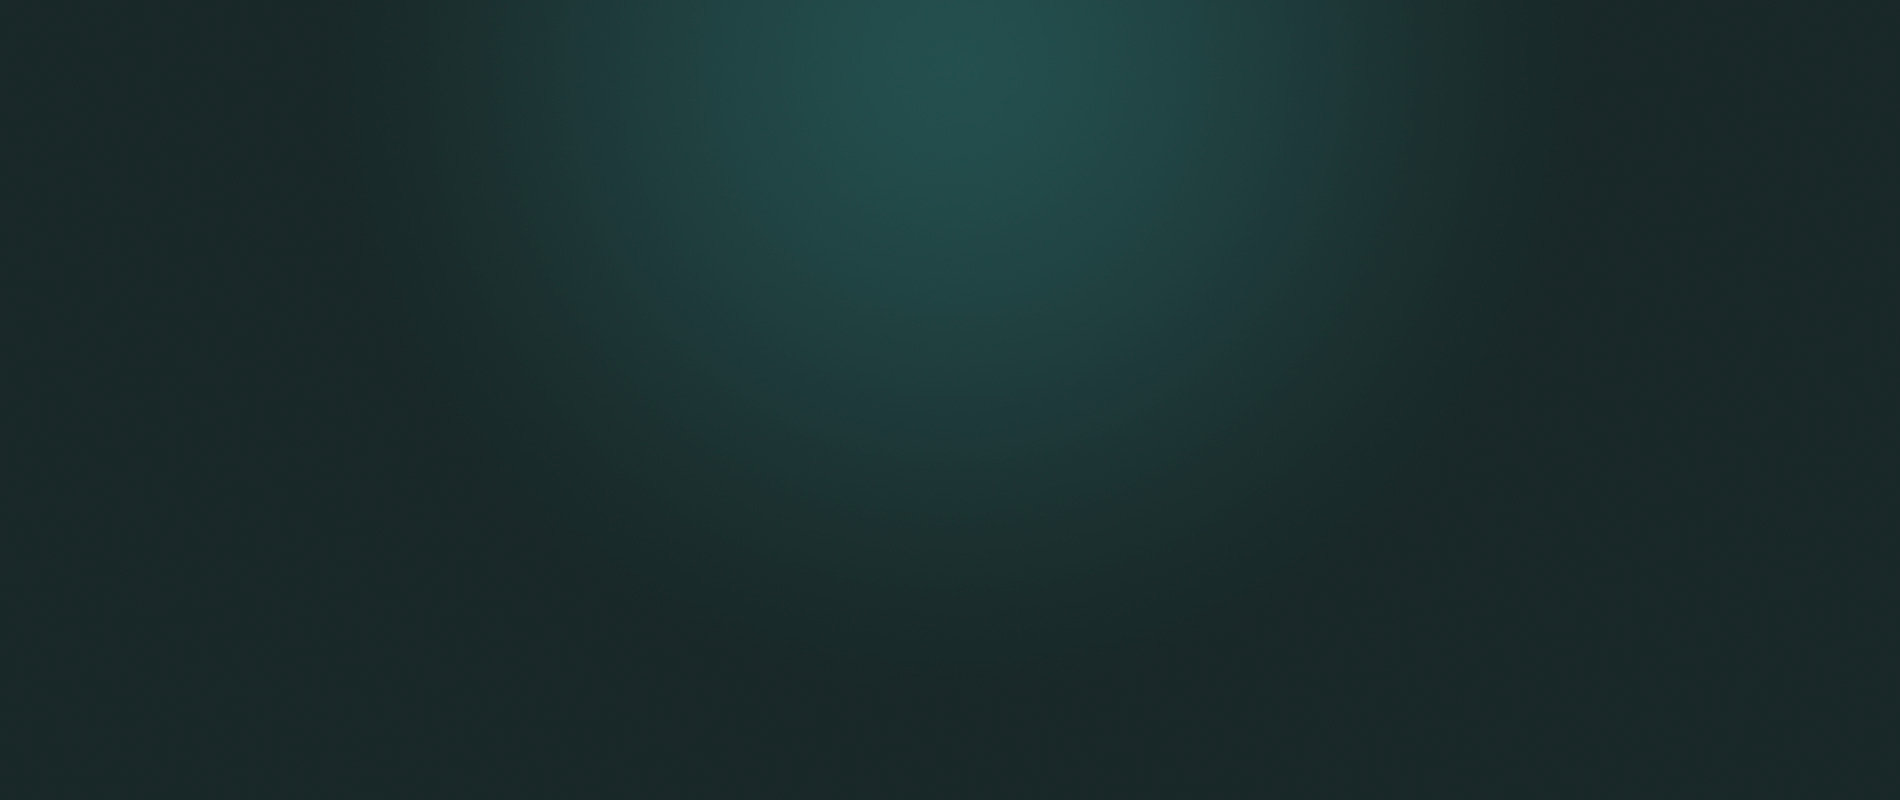 Free Download Background Gradient Dark Green By Gds70 On [1900X800] For